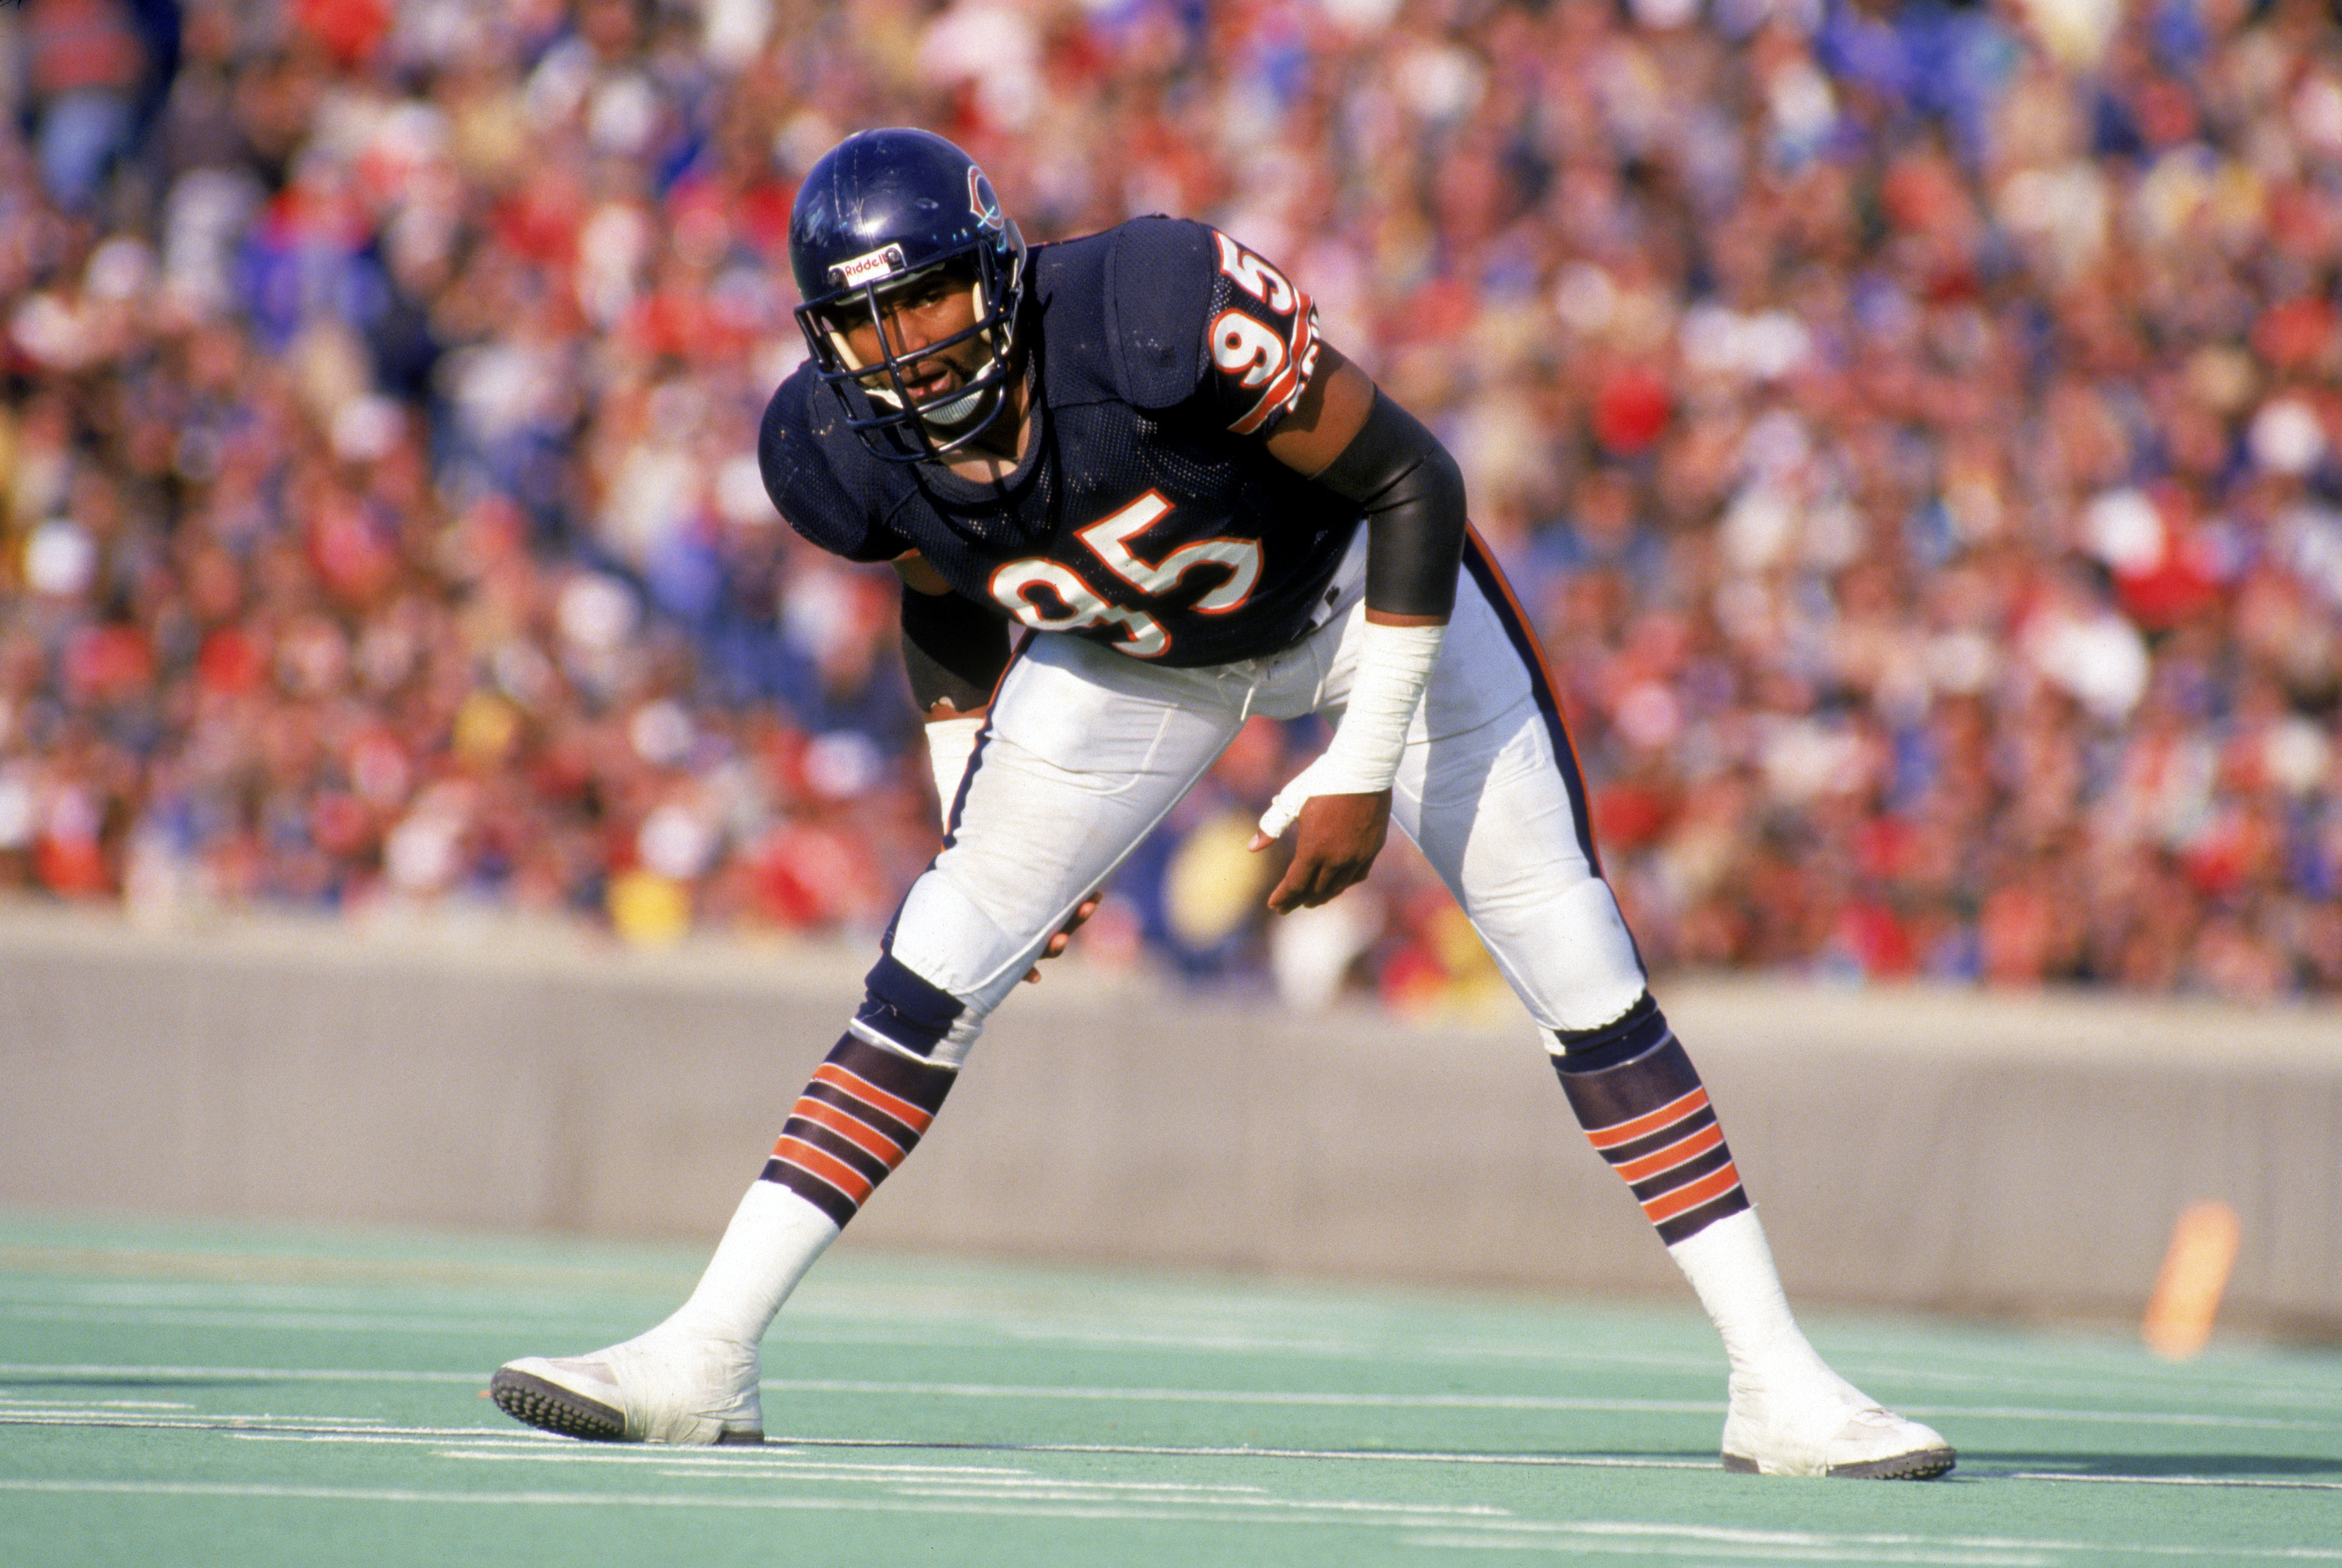 1985 chicago bears jersey